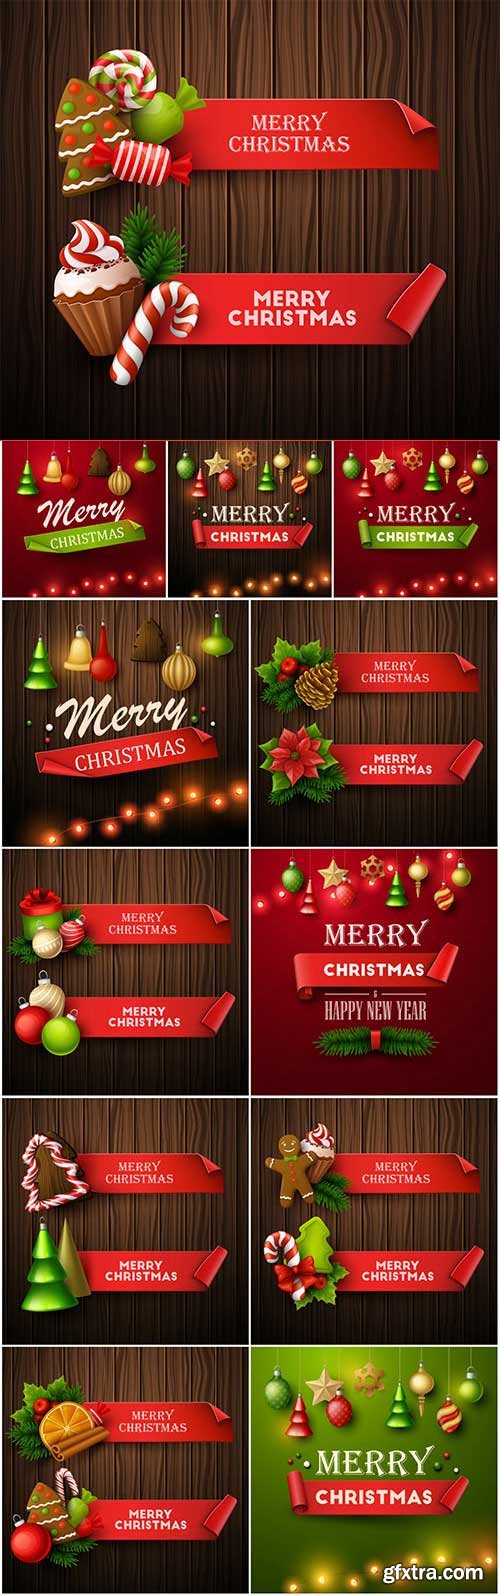 New Year and Christmas vector vol 7